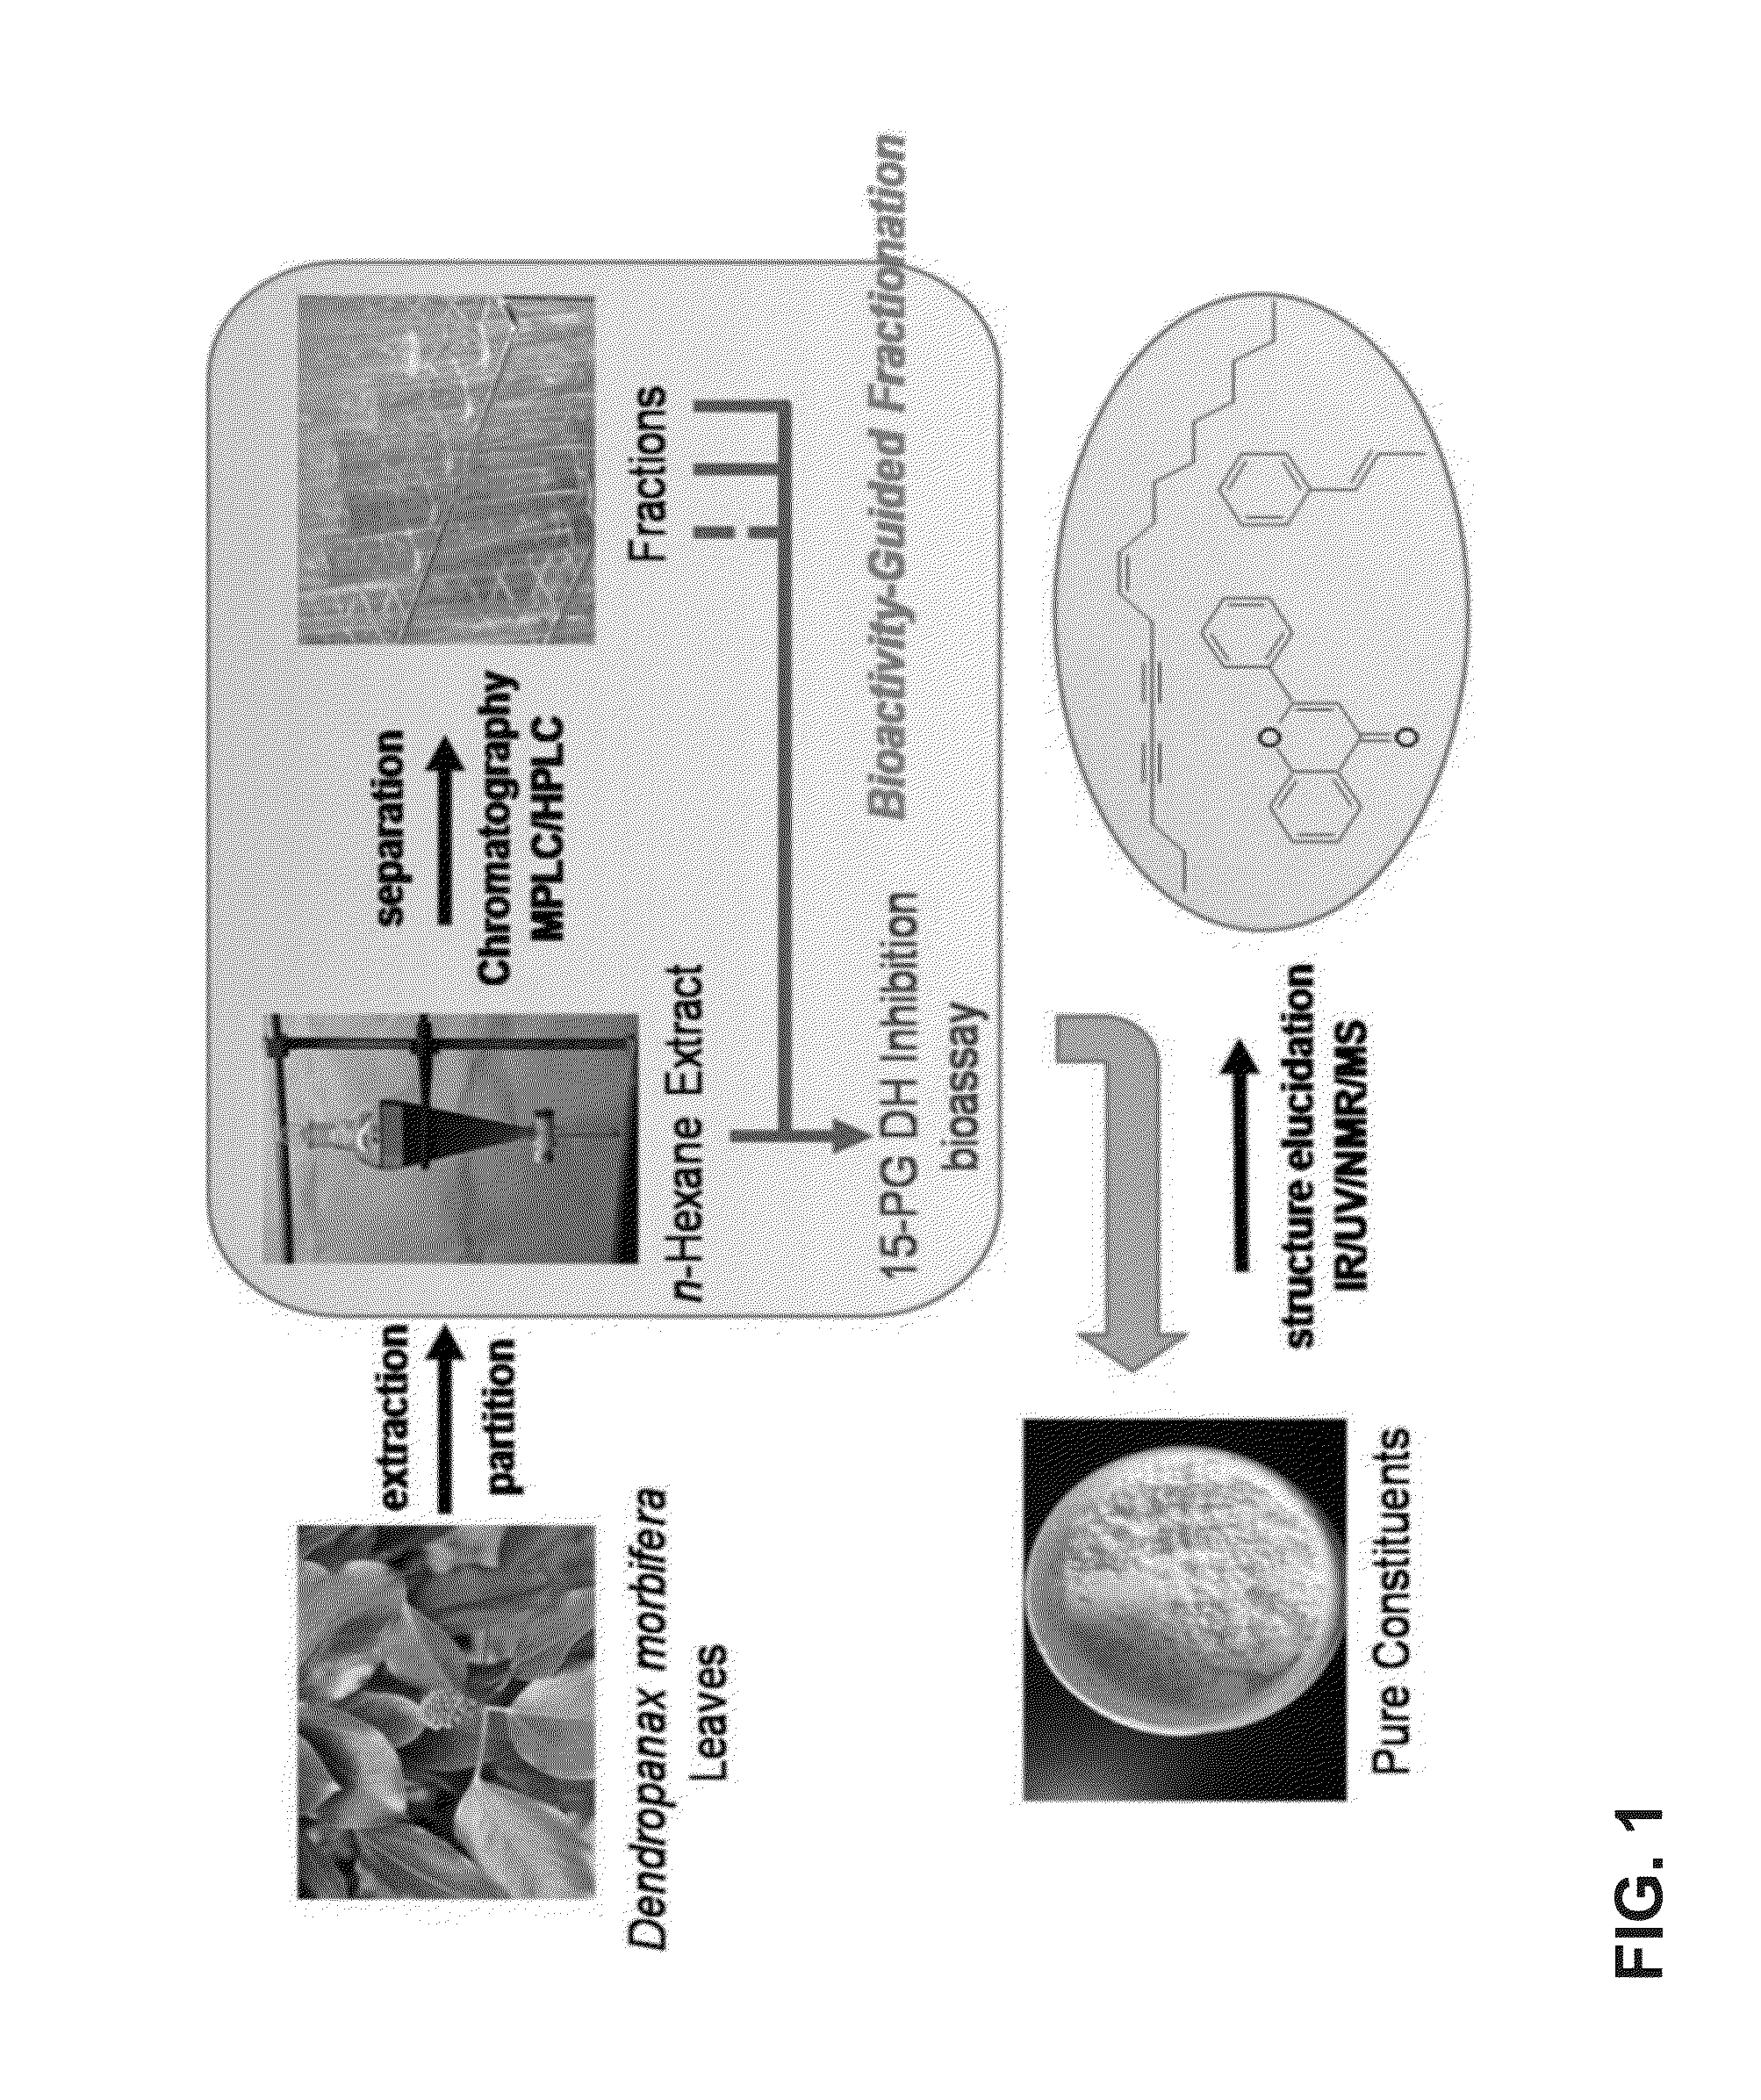 Composition comprising dendropanax morbiferaextract or compound derived therefrom as active ingredient for preventing and treating benign prostatic hyperplasia